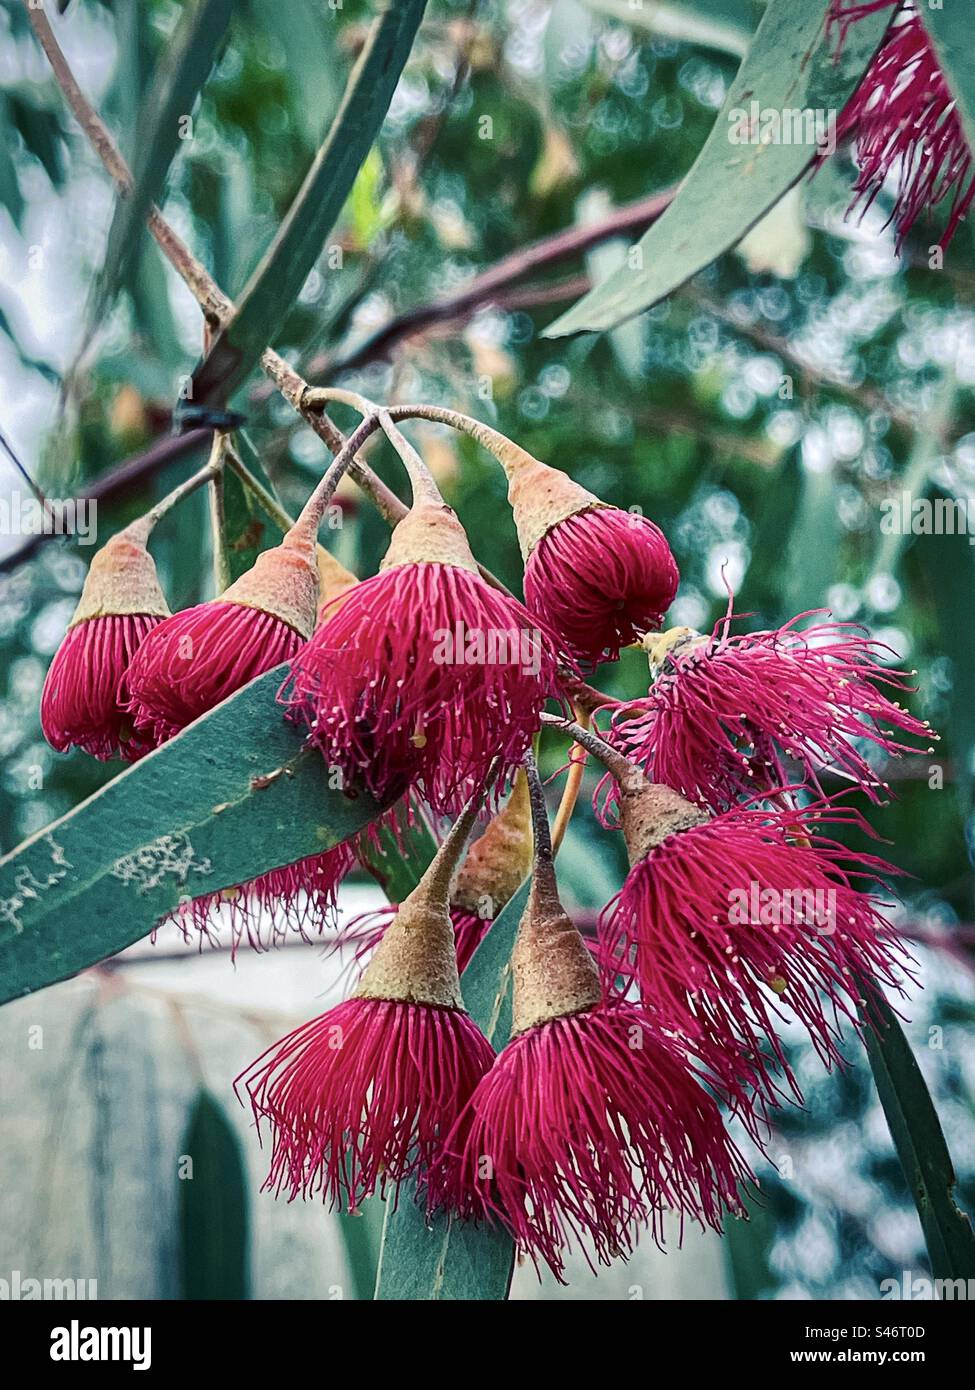 Close-up of red flowers of the yellow gum tree or Eucalyptus leucoxylon, an Australian native tree which flowers in winter. Stock Photo